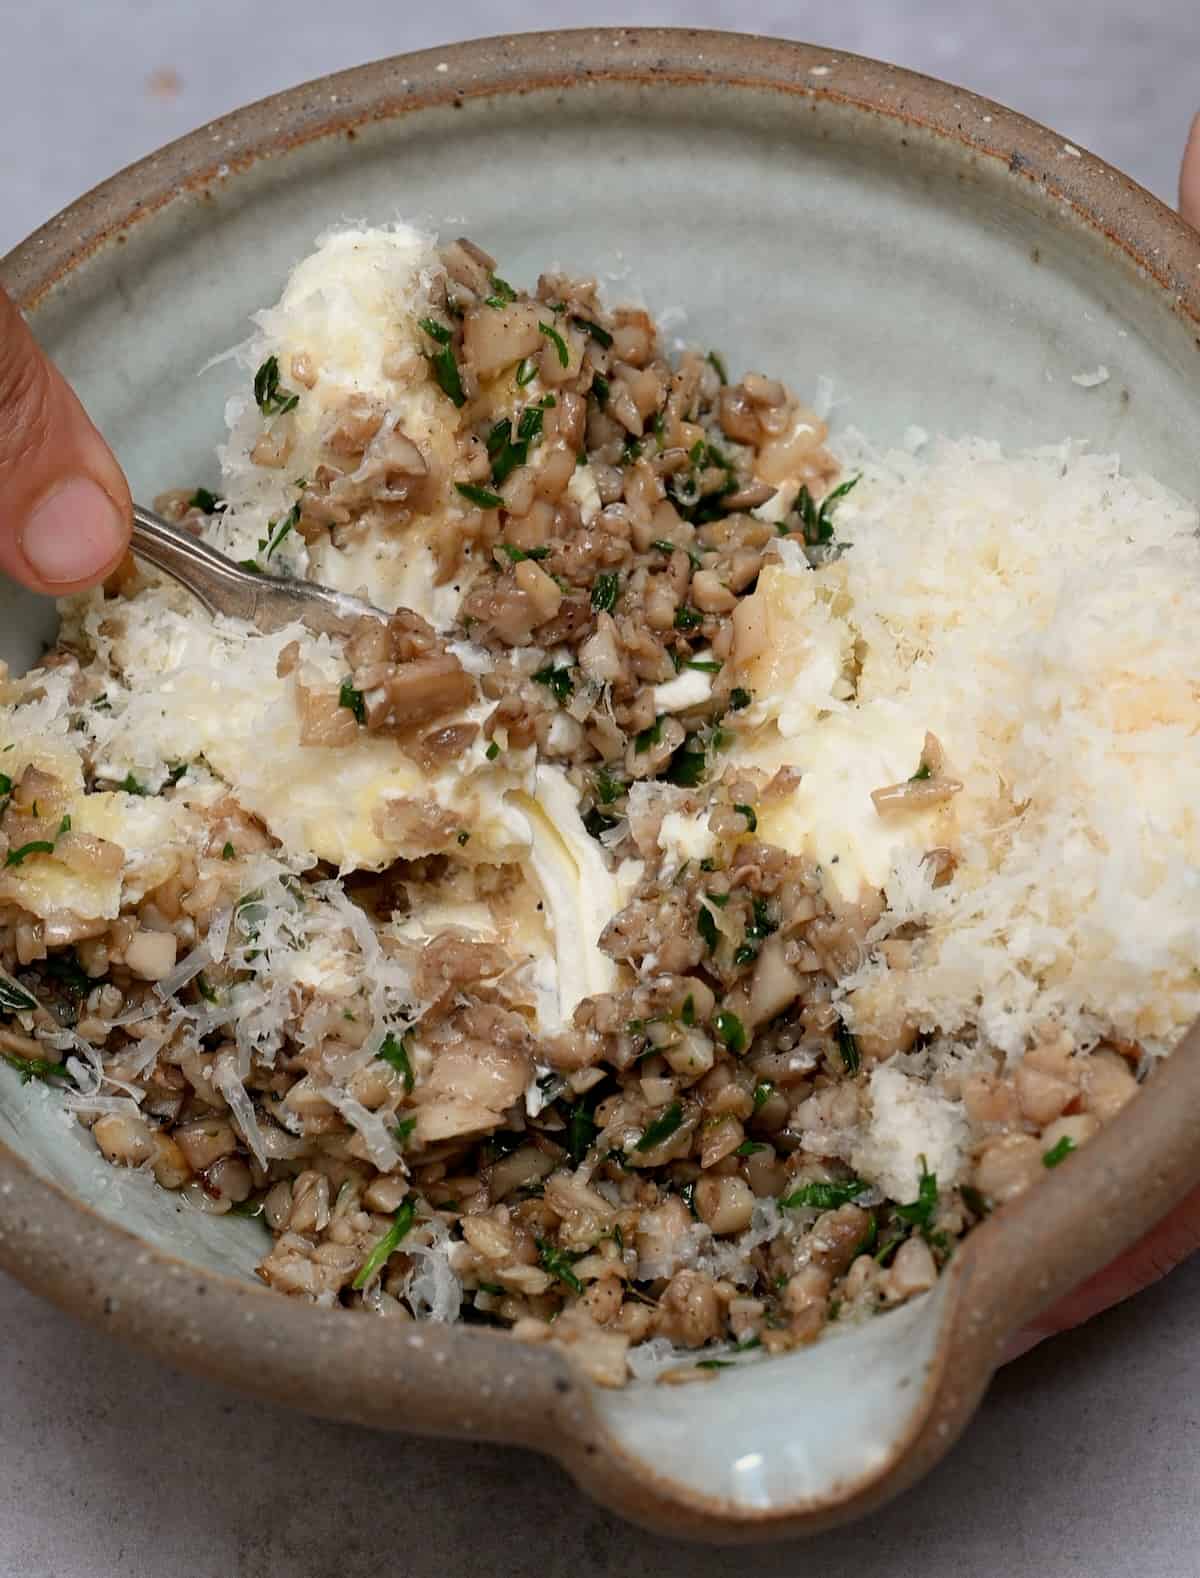 Mixing mushroom stuffing in a bowl